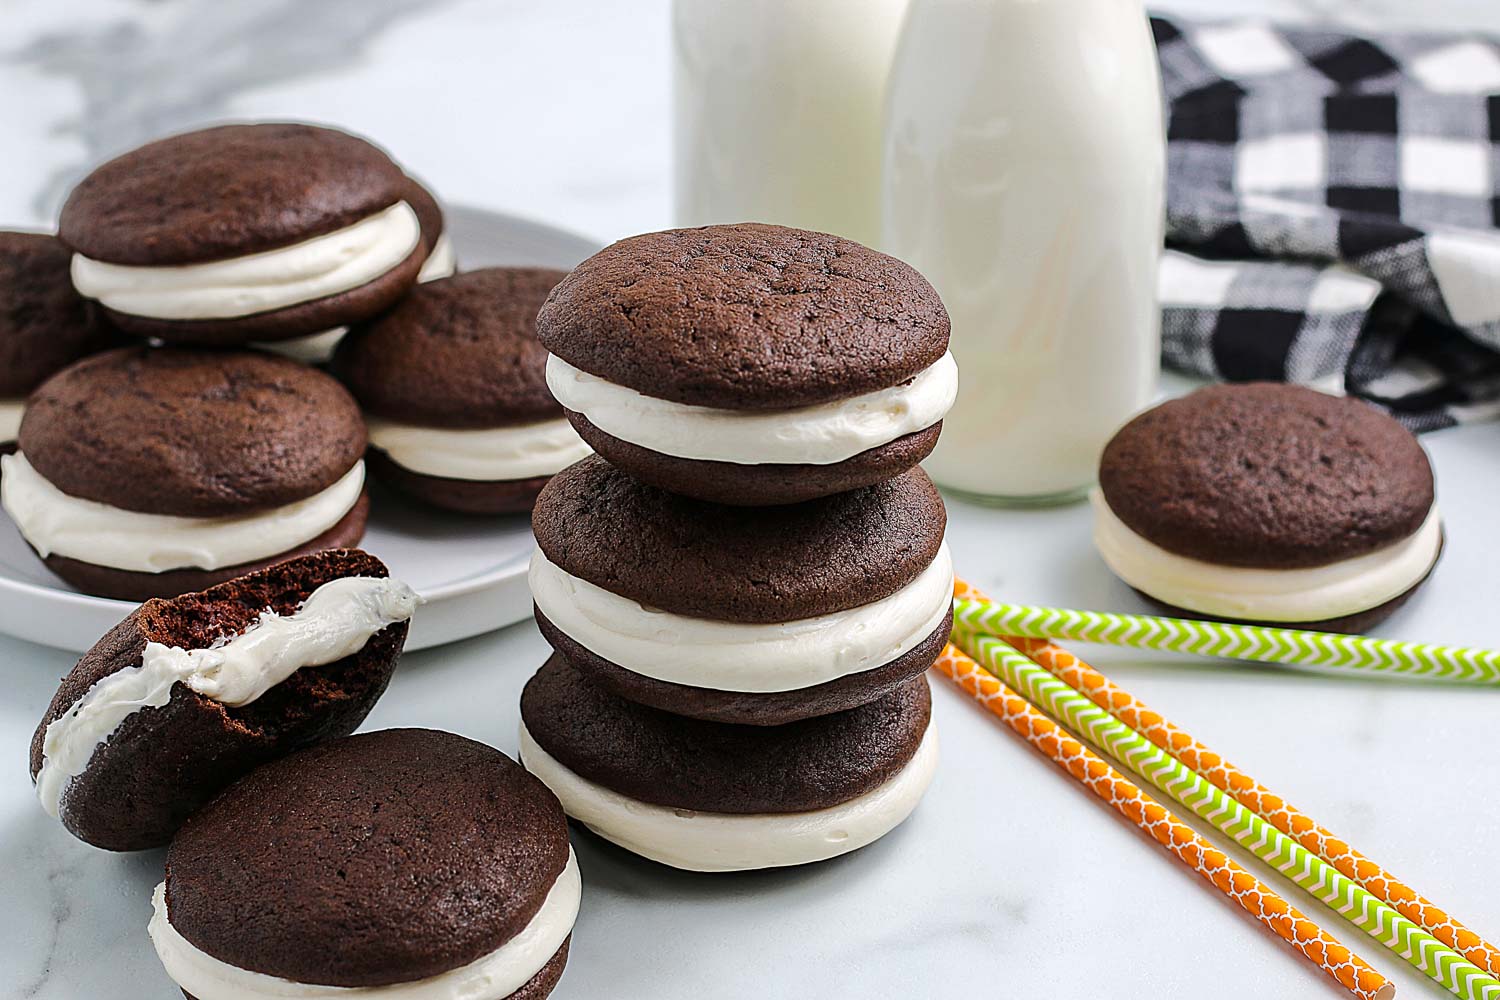 Chocolate Whoopie Pies stacked on top of each other and on a platter.